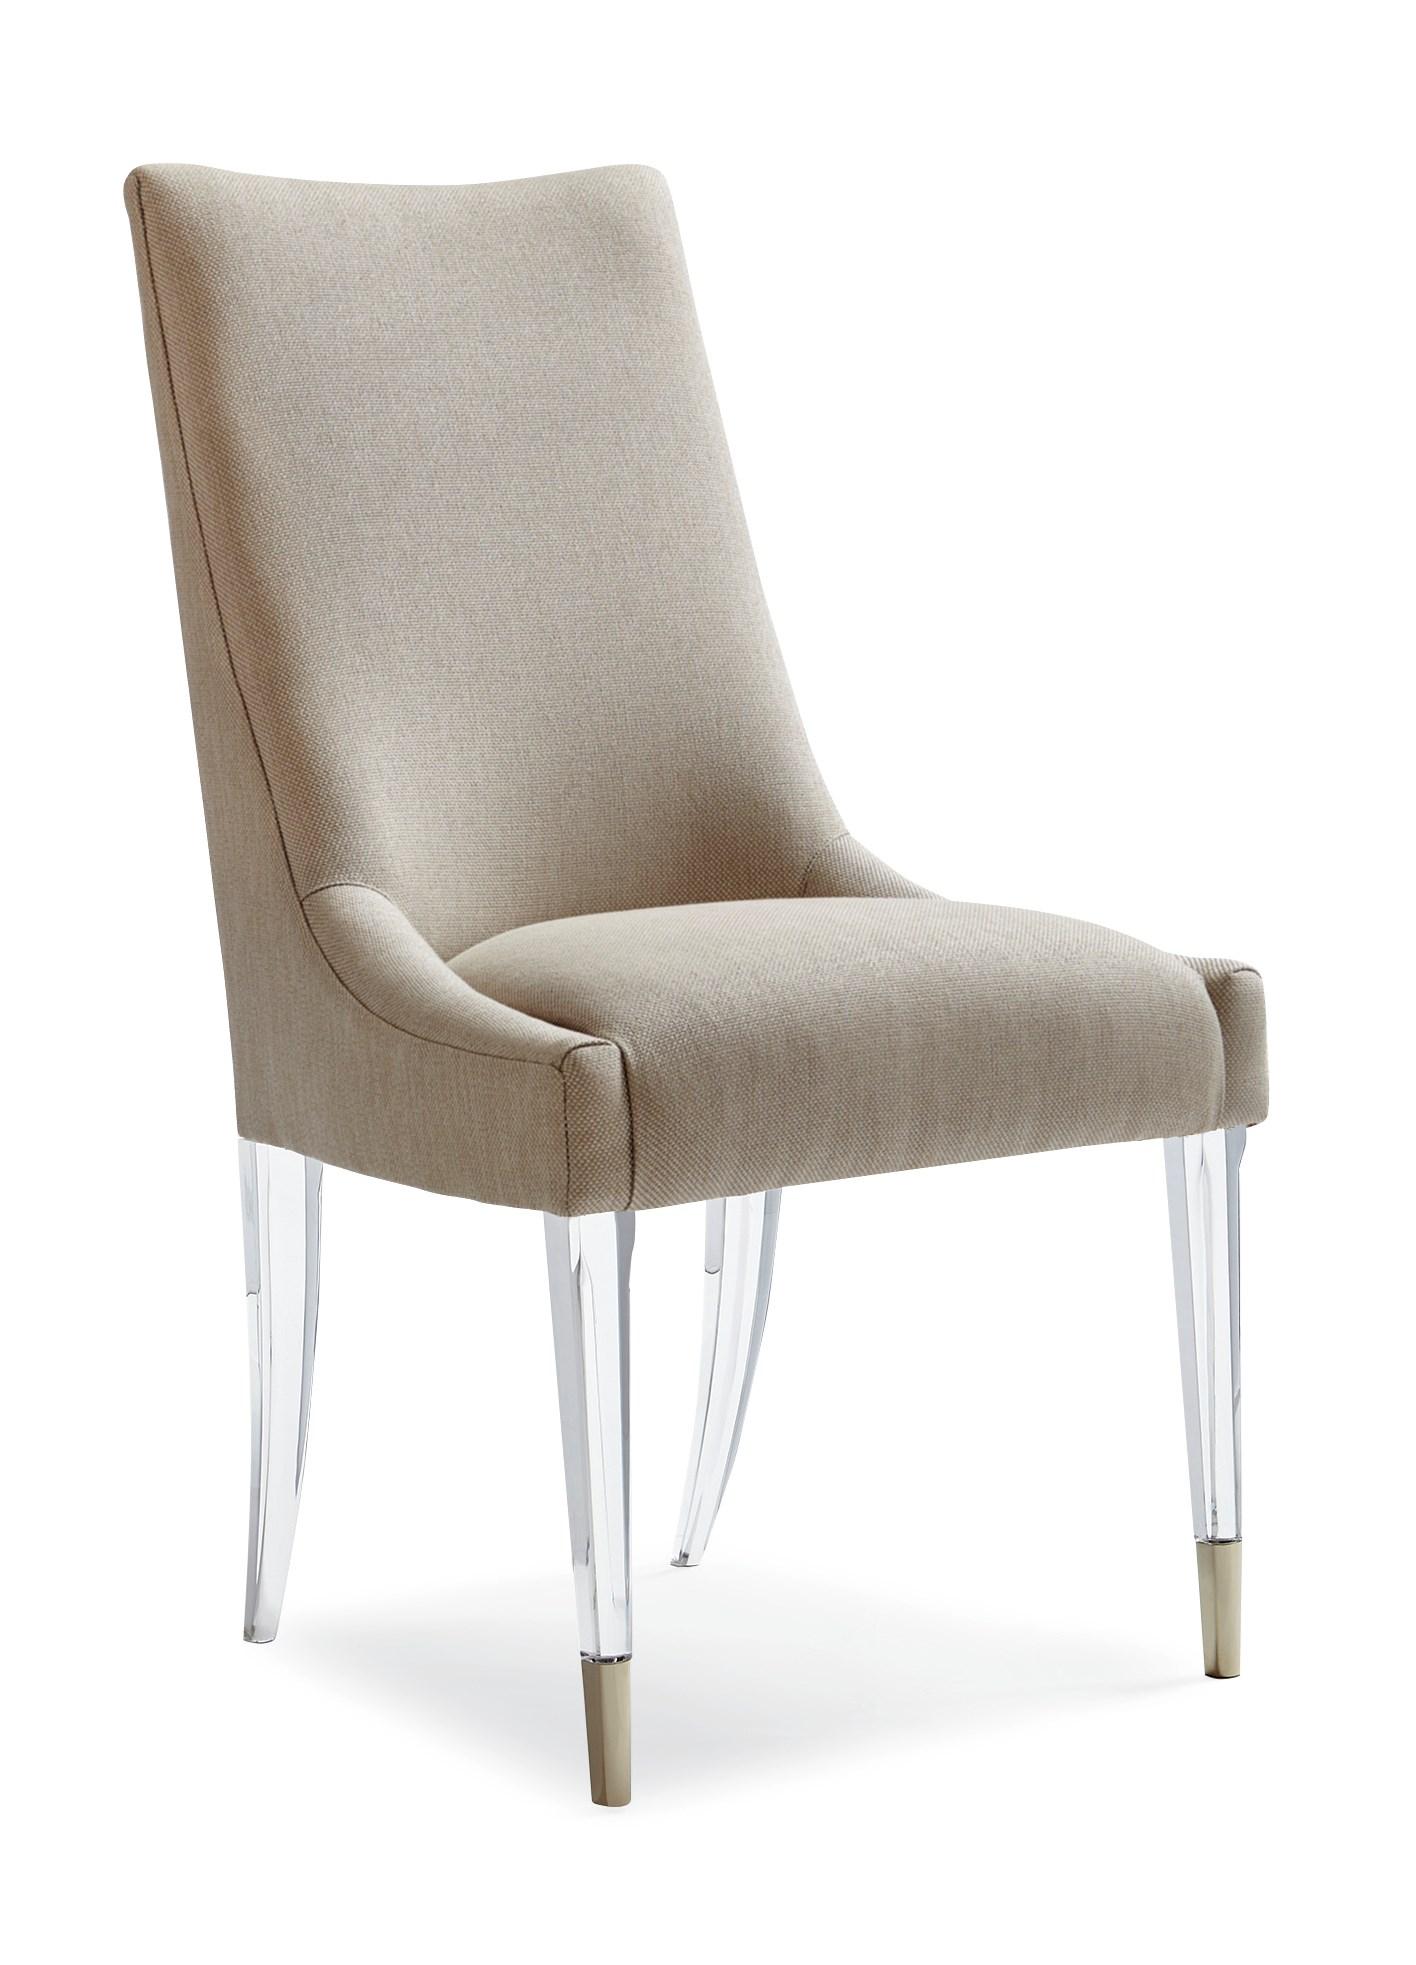 Contemporary Dining Chair Set I'M FLOATING! CLA-416-282-Set-2 in Clear, Gold, Beige Fabric